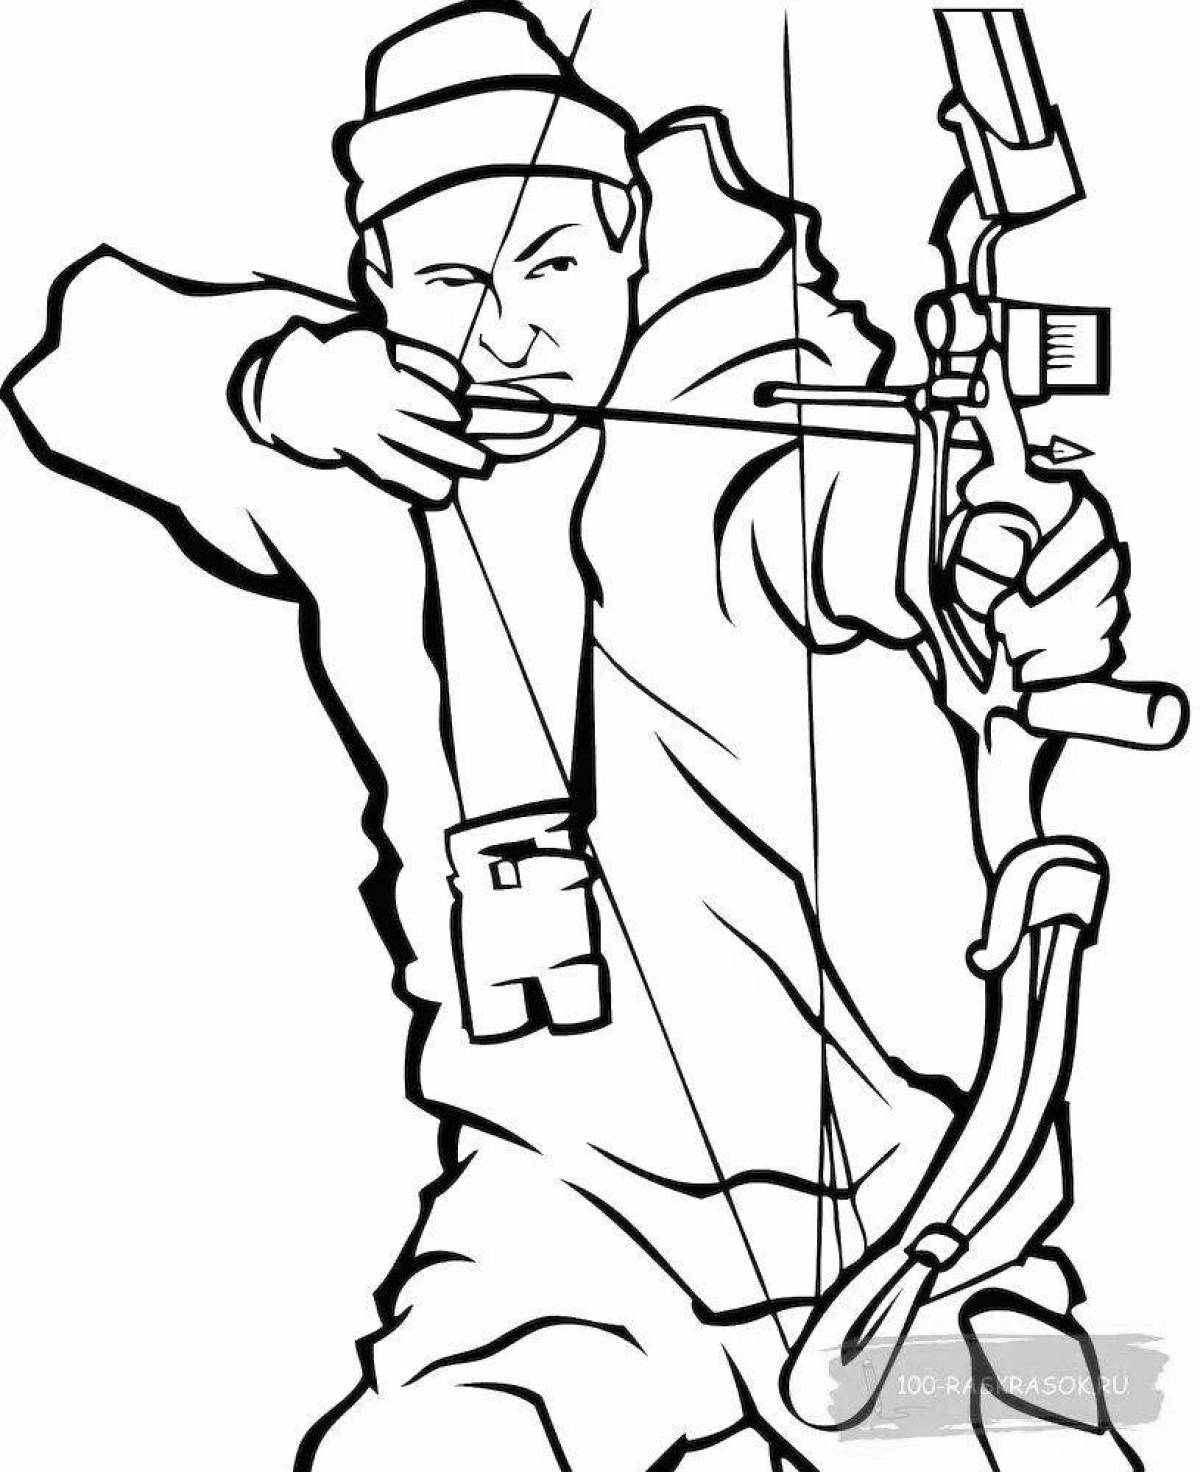 Cunning hunter coloring page